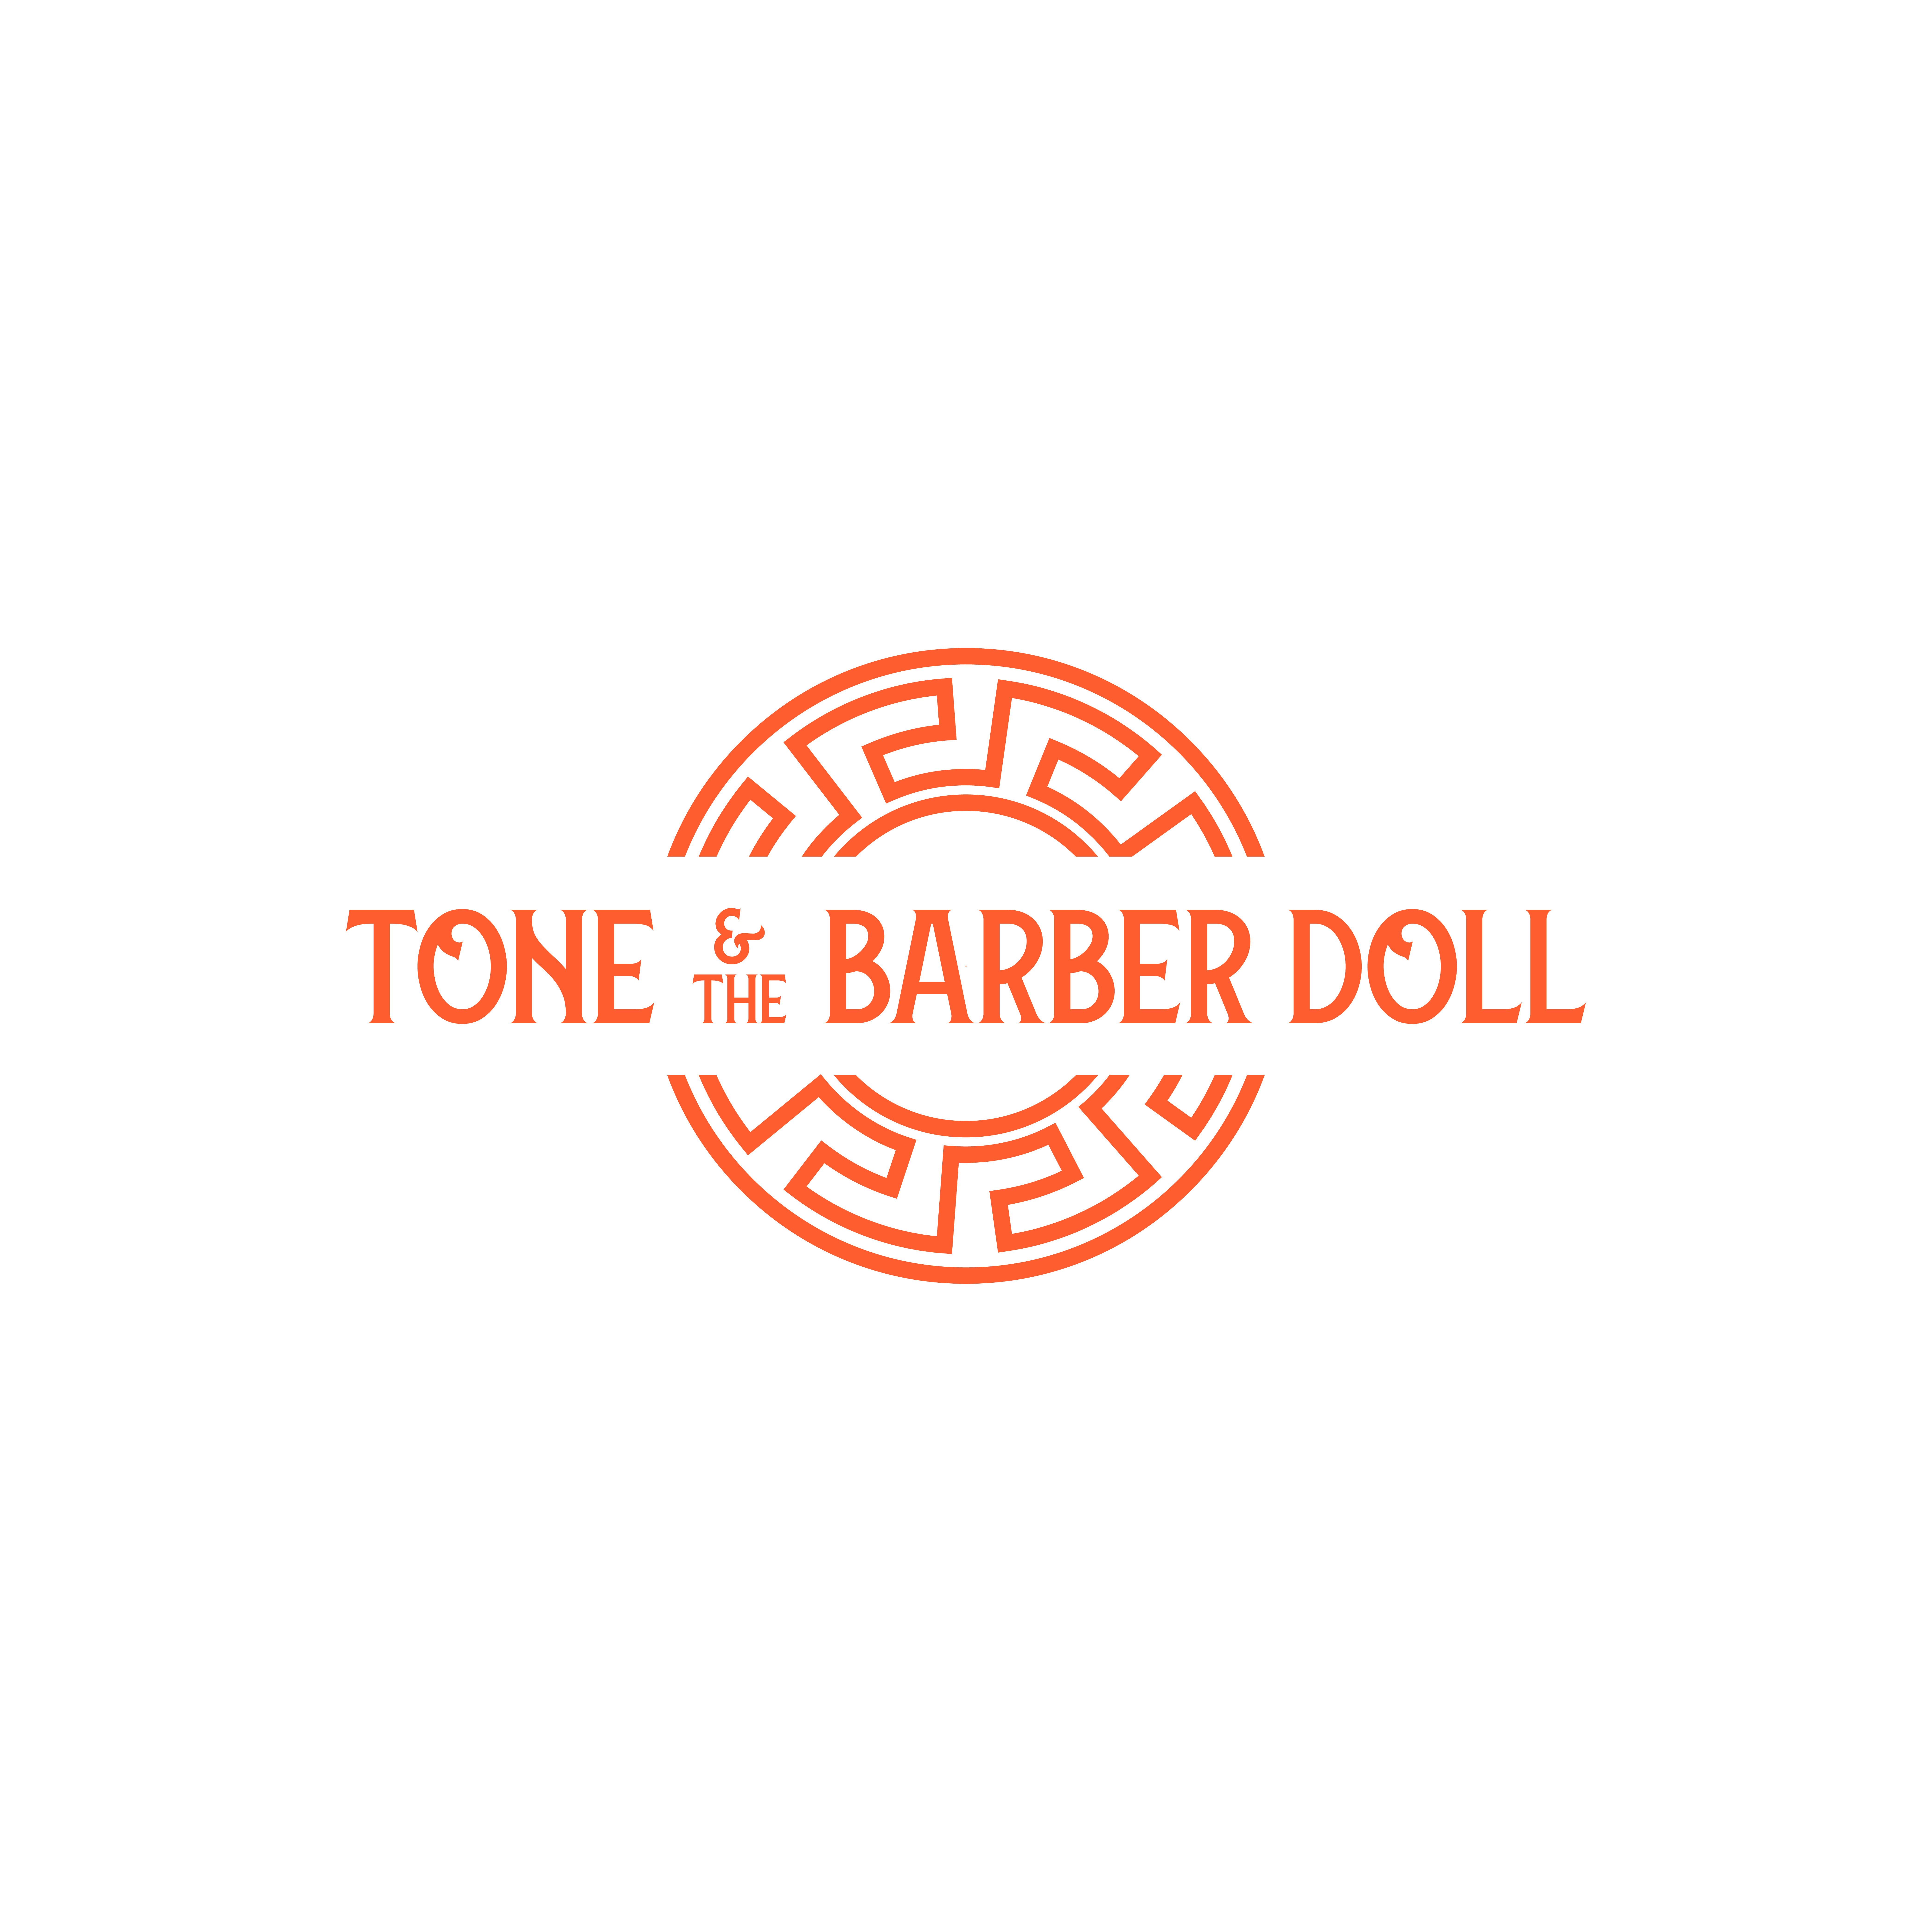 Tone & The Barber Doll